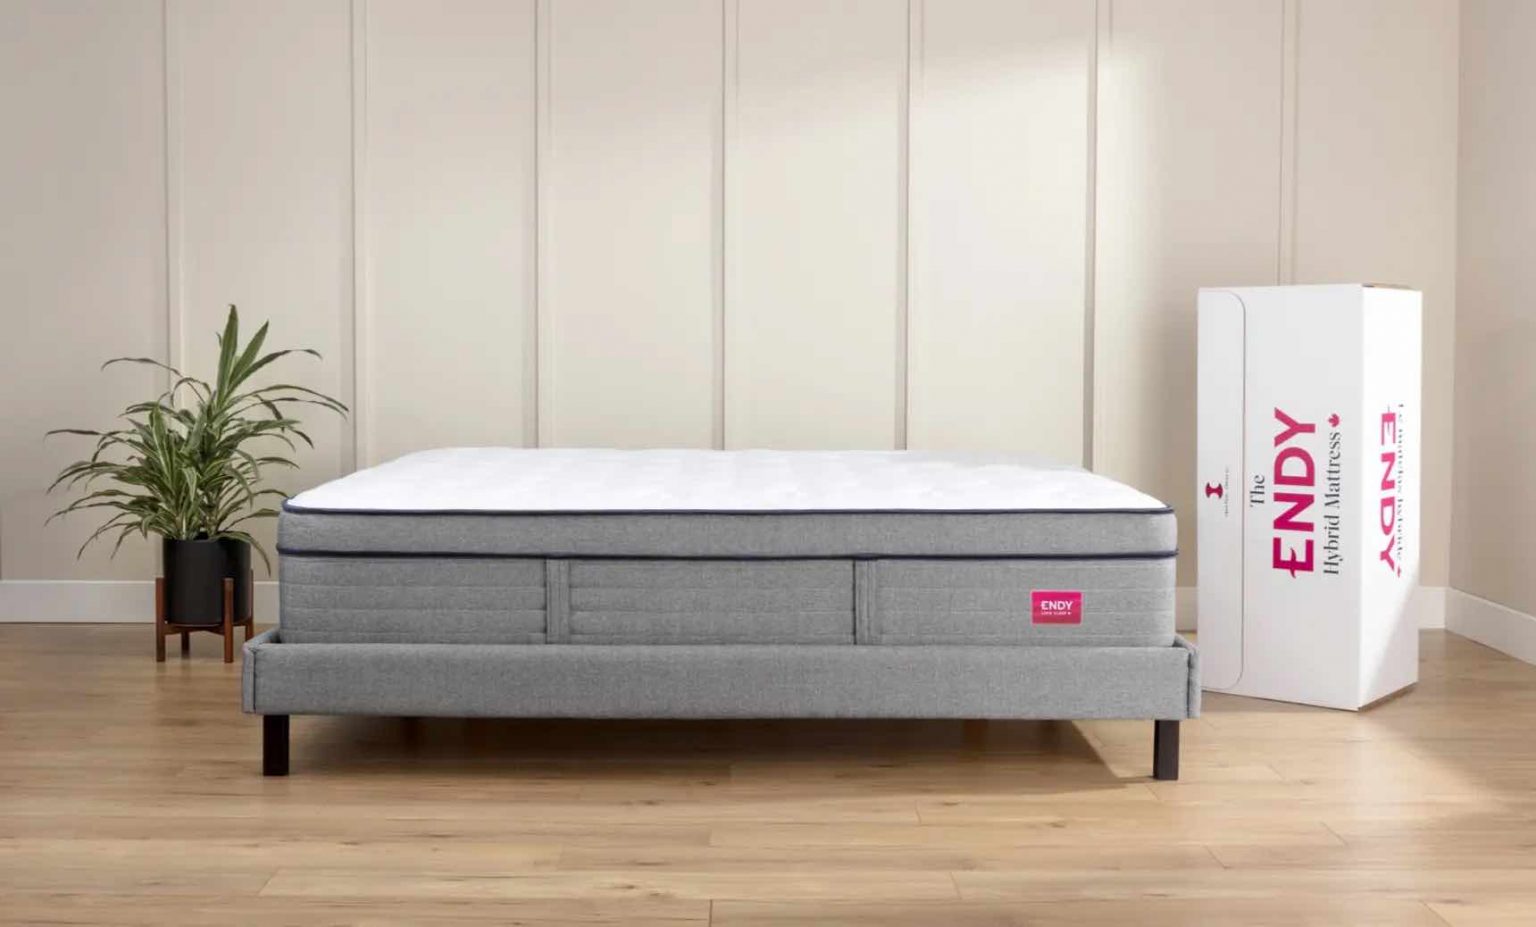 product image of the Endy Hybrid mattress